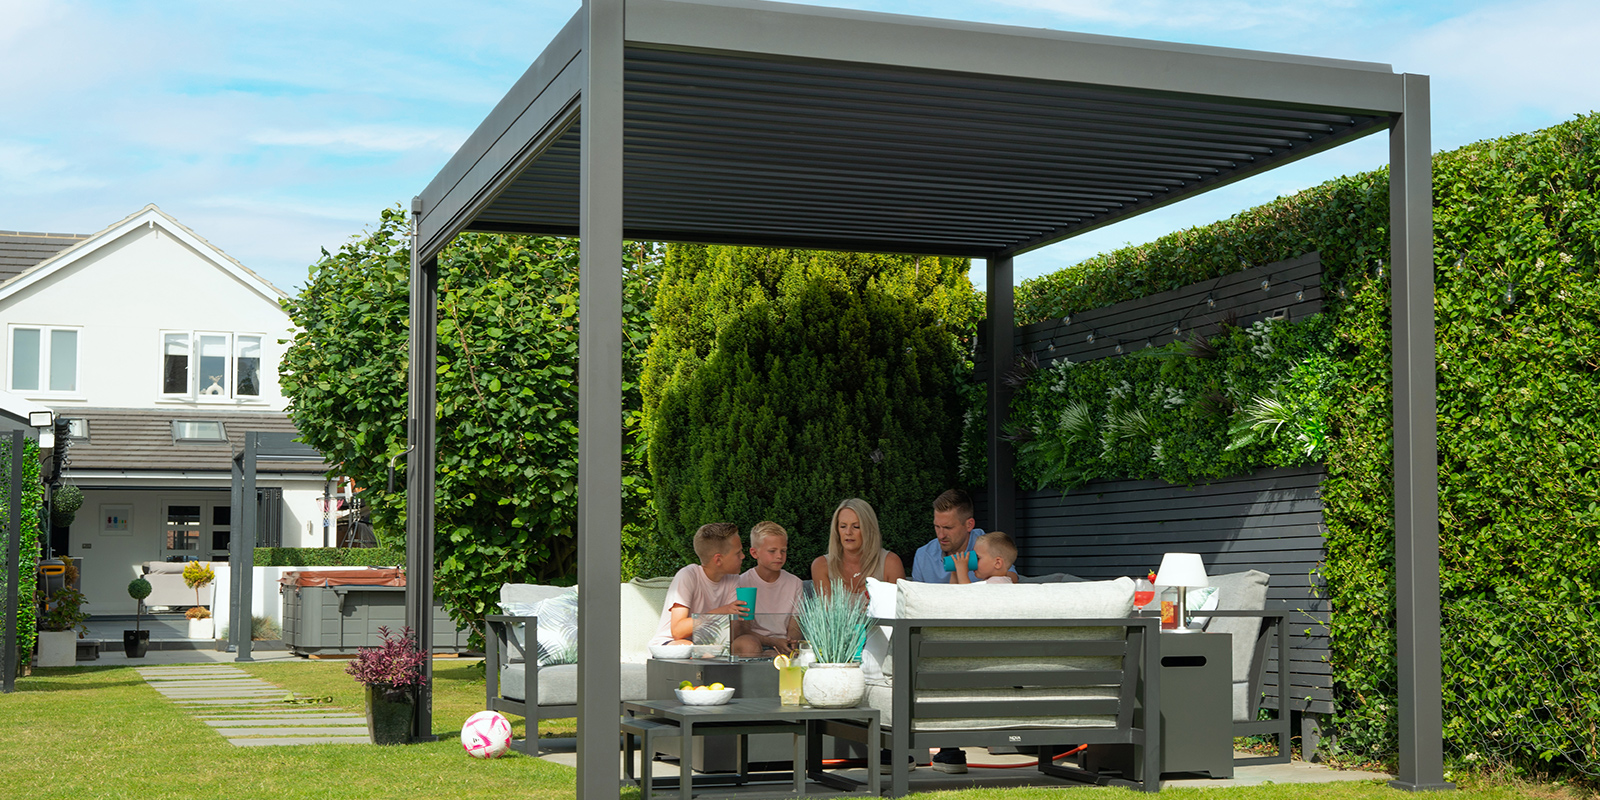 Is Steel or Aluminium Better for Outdoor Furniture?